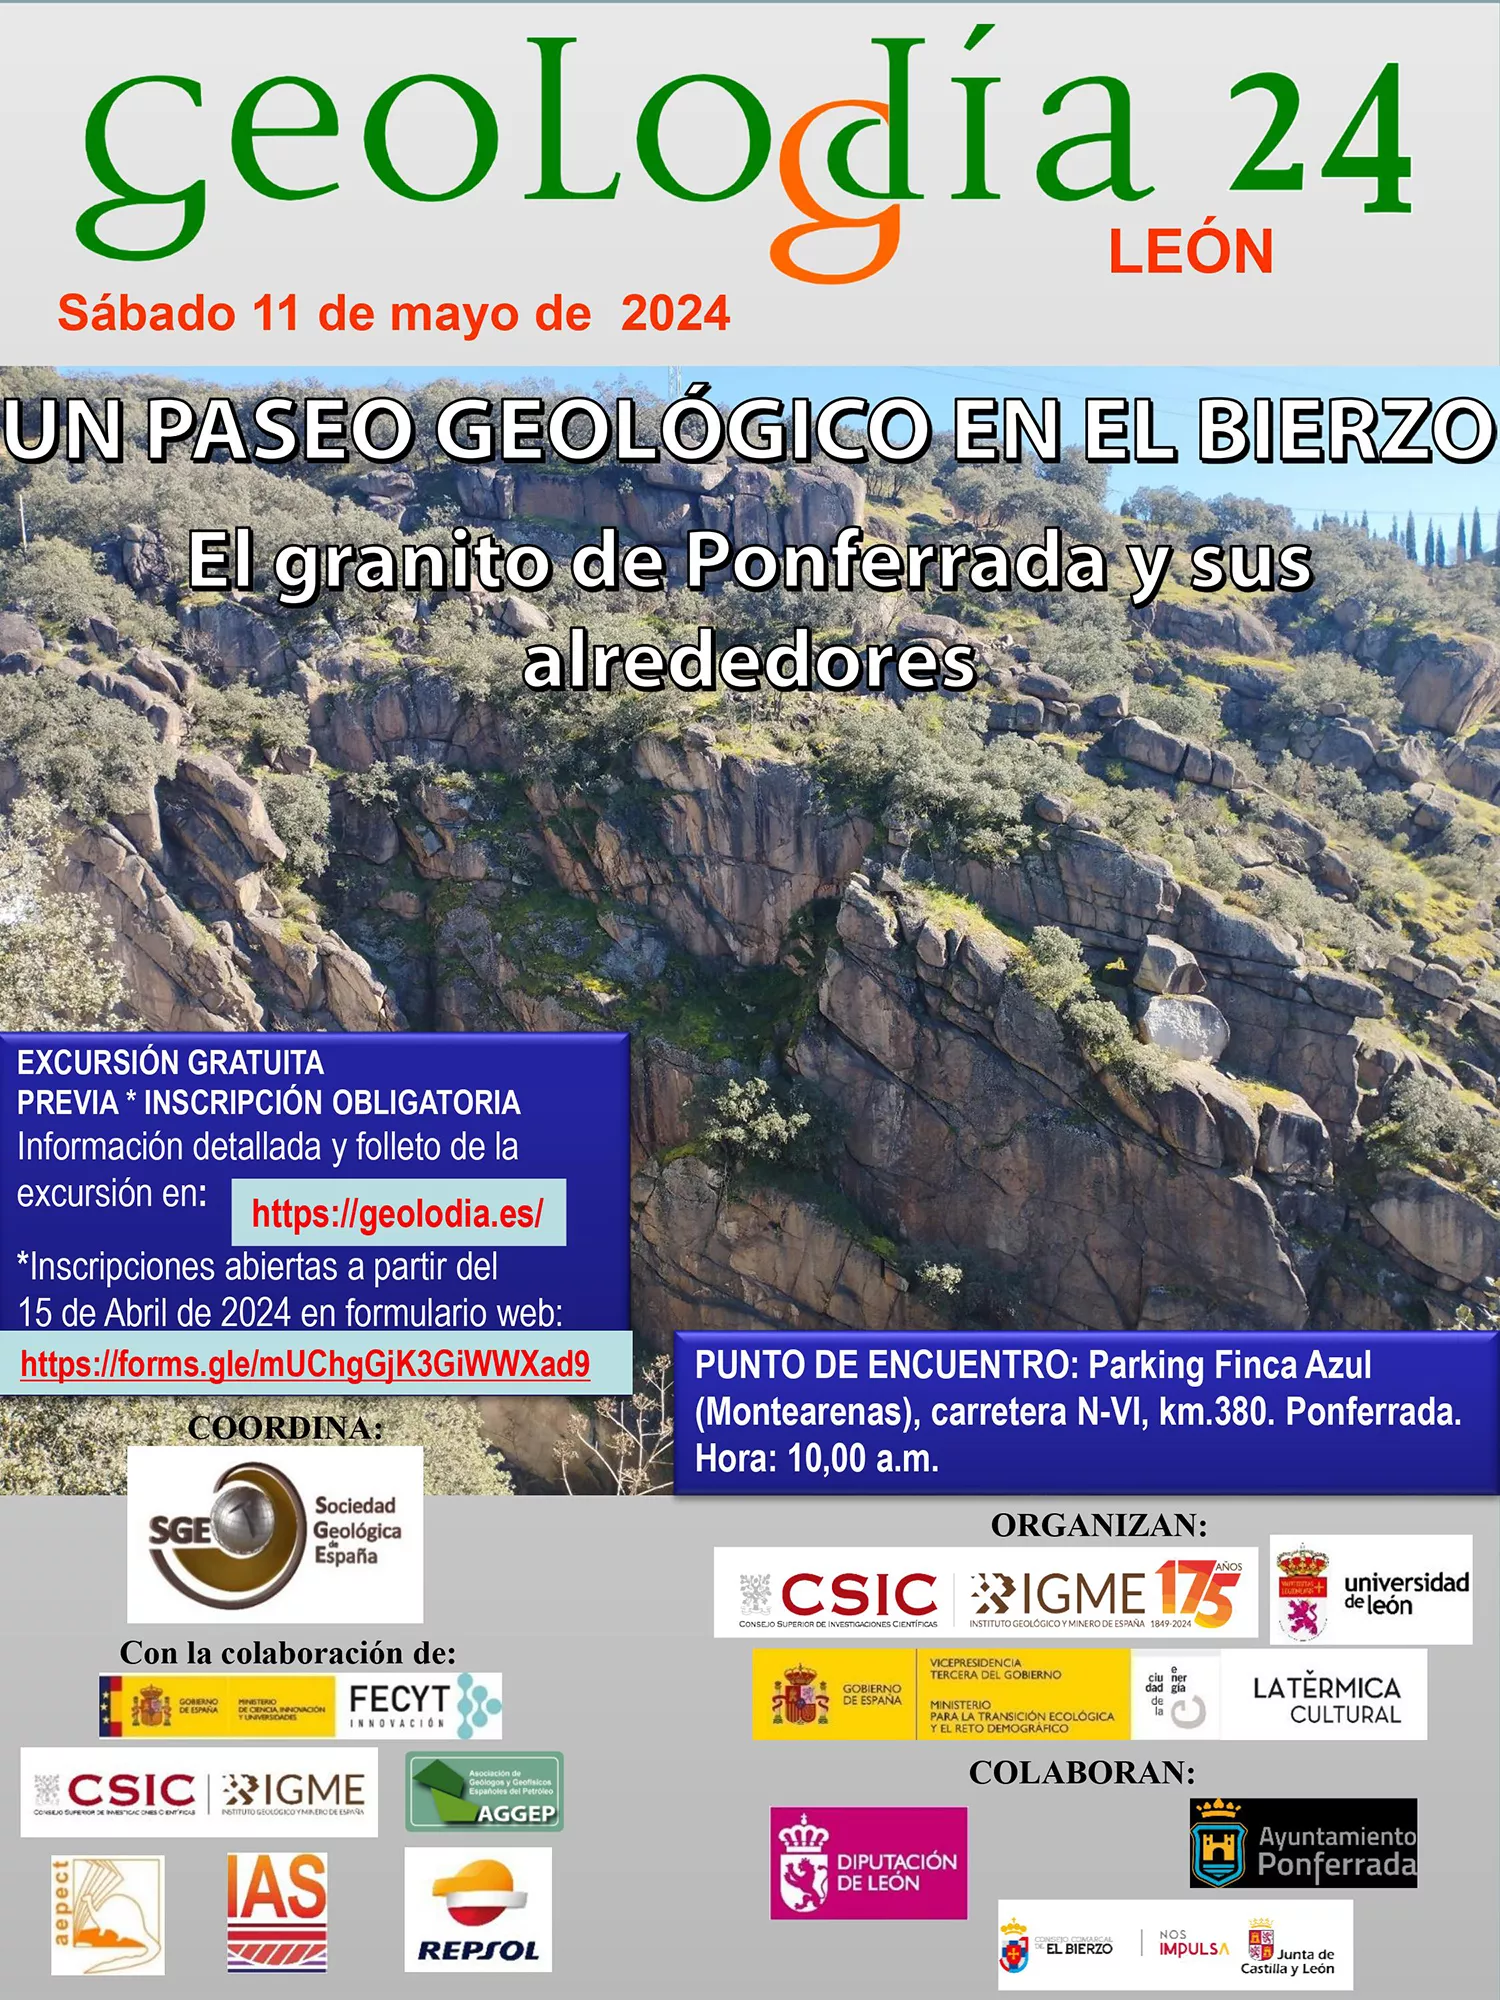 Poster Geolodía 2024 